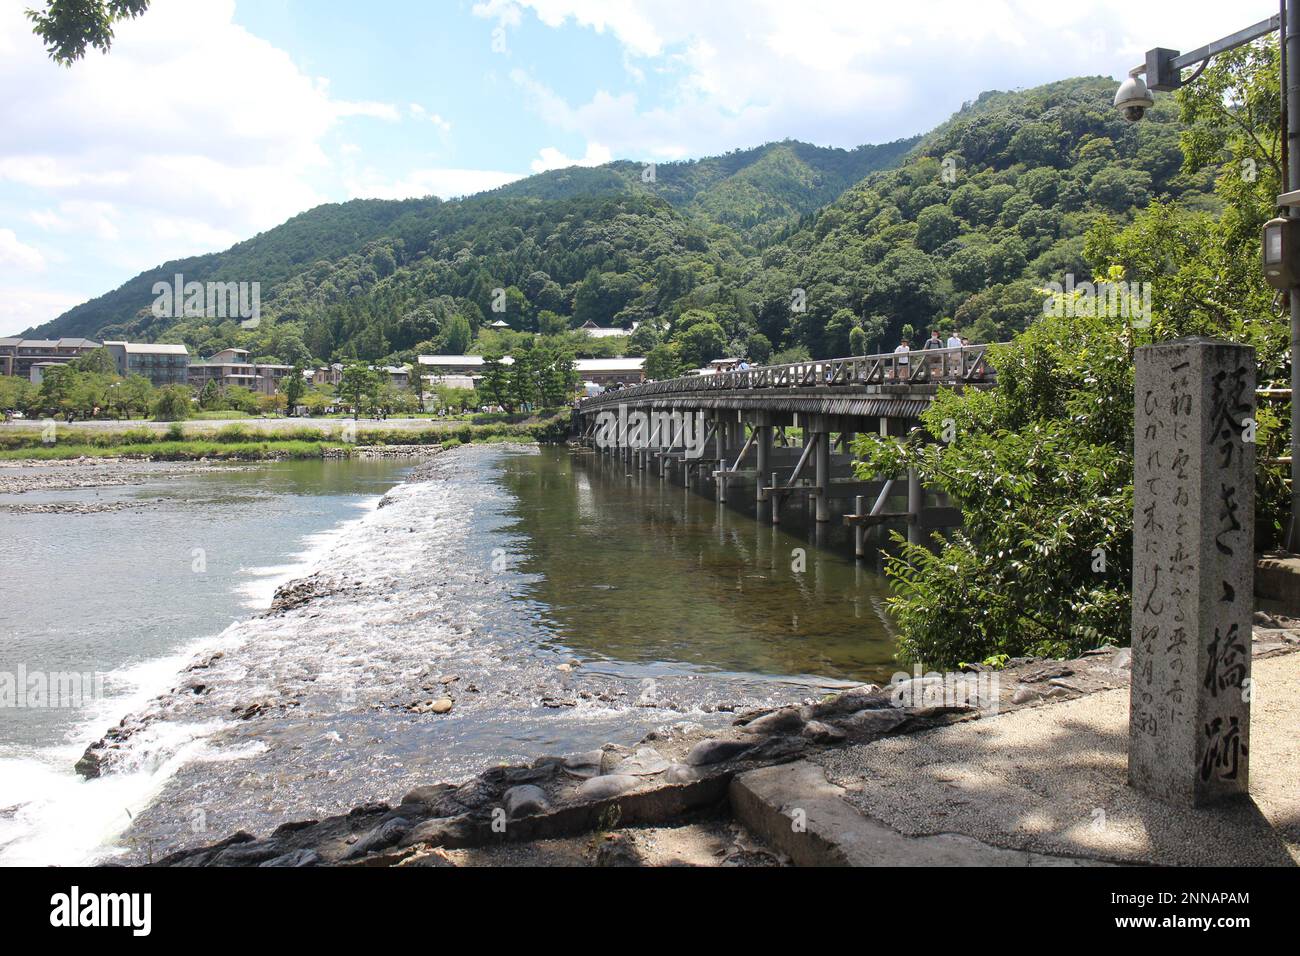 Togetsu-kyo Bridge with a stone monument (meaning an ancient love story) in Arashiyama, Kyoto, Japan Stock Photo